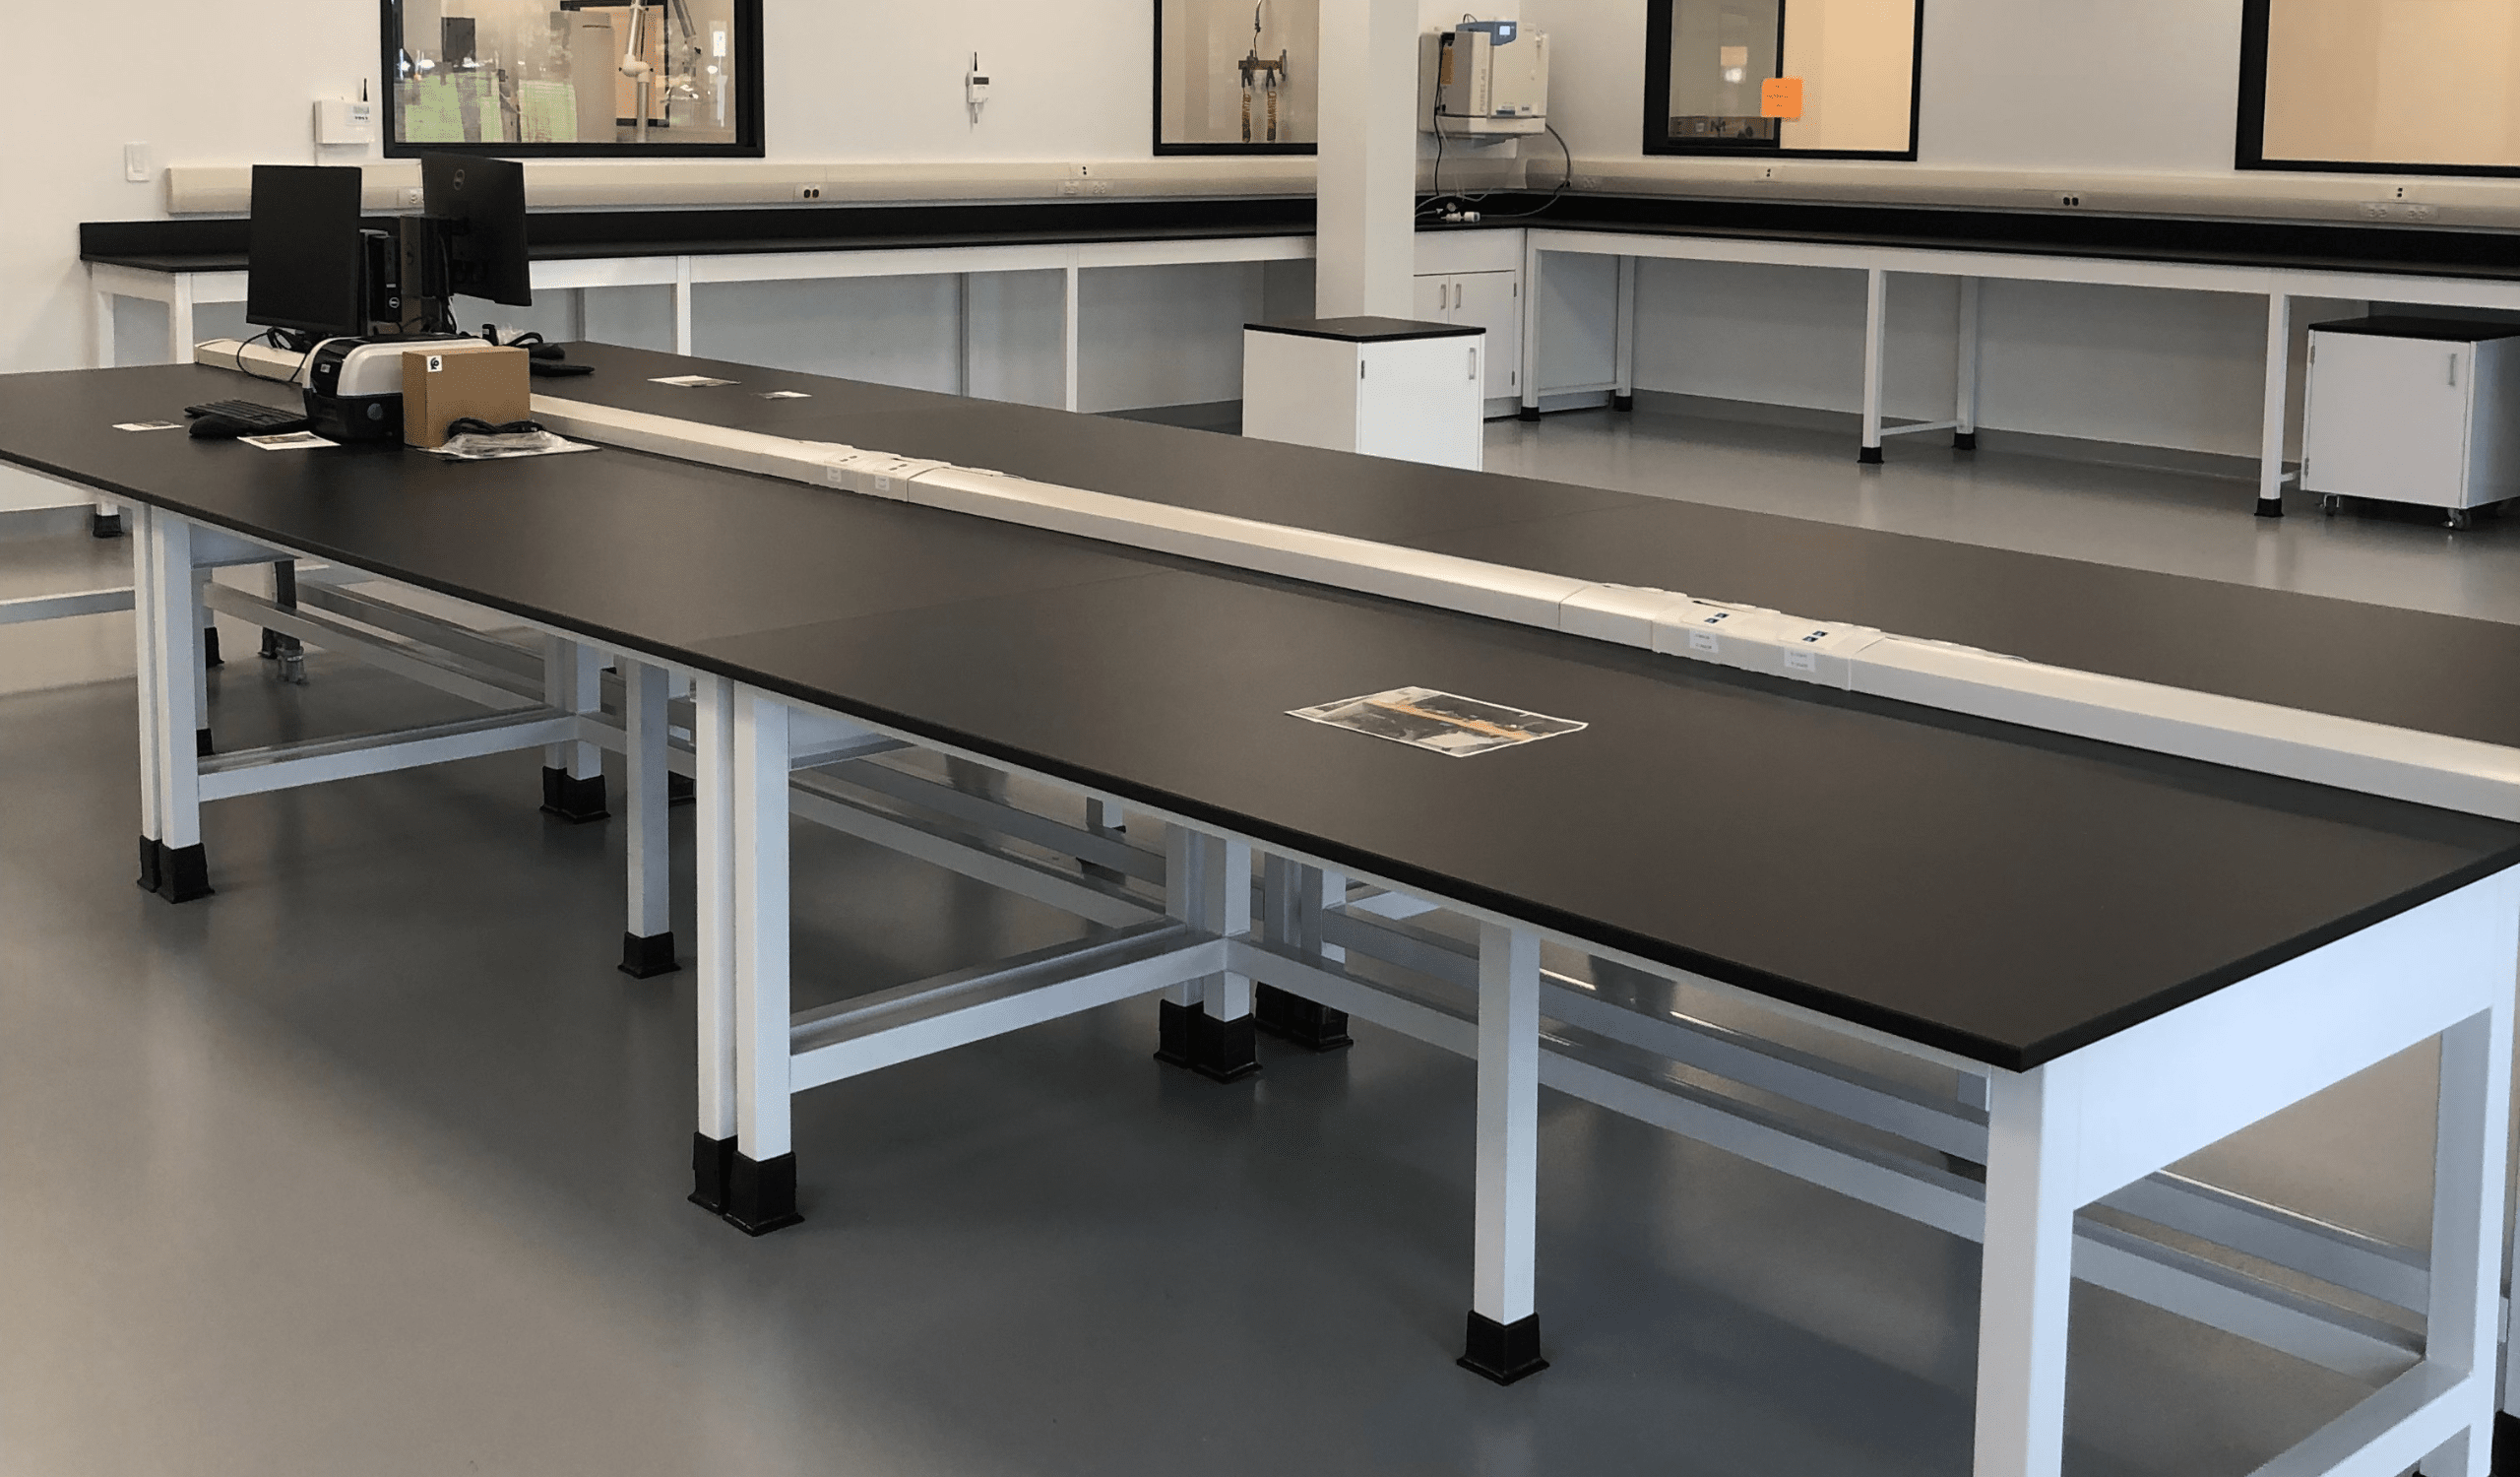 Max Resistance2 laboratory work surface panels from Fundermax with Deep Black #0082 decor for the CellCarta in Naperville, Illinois.